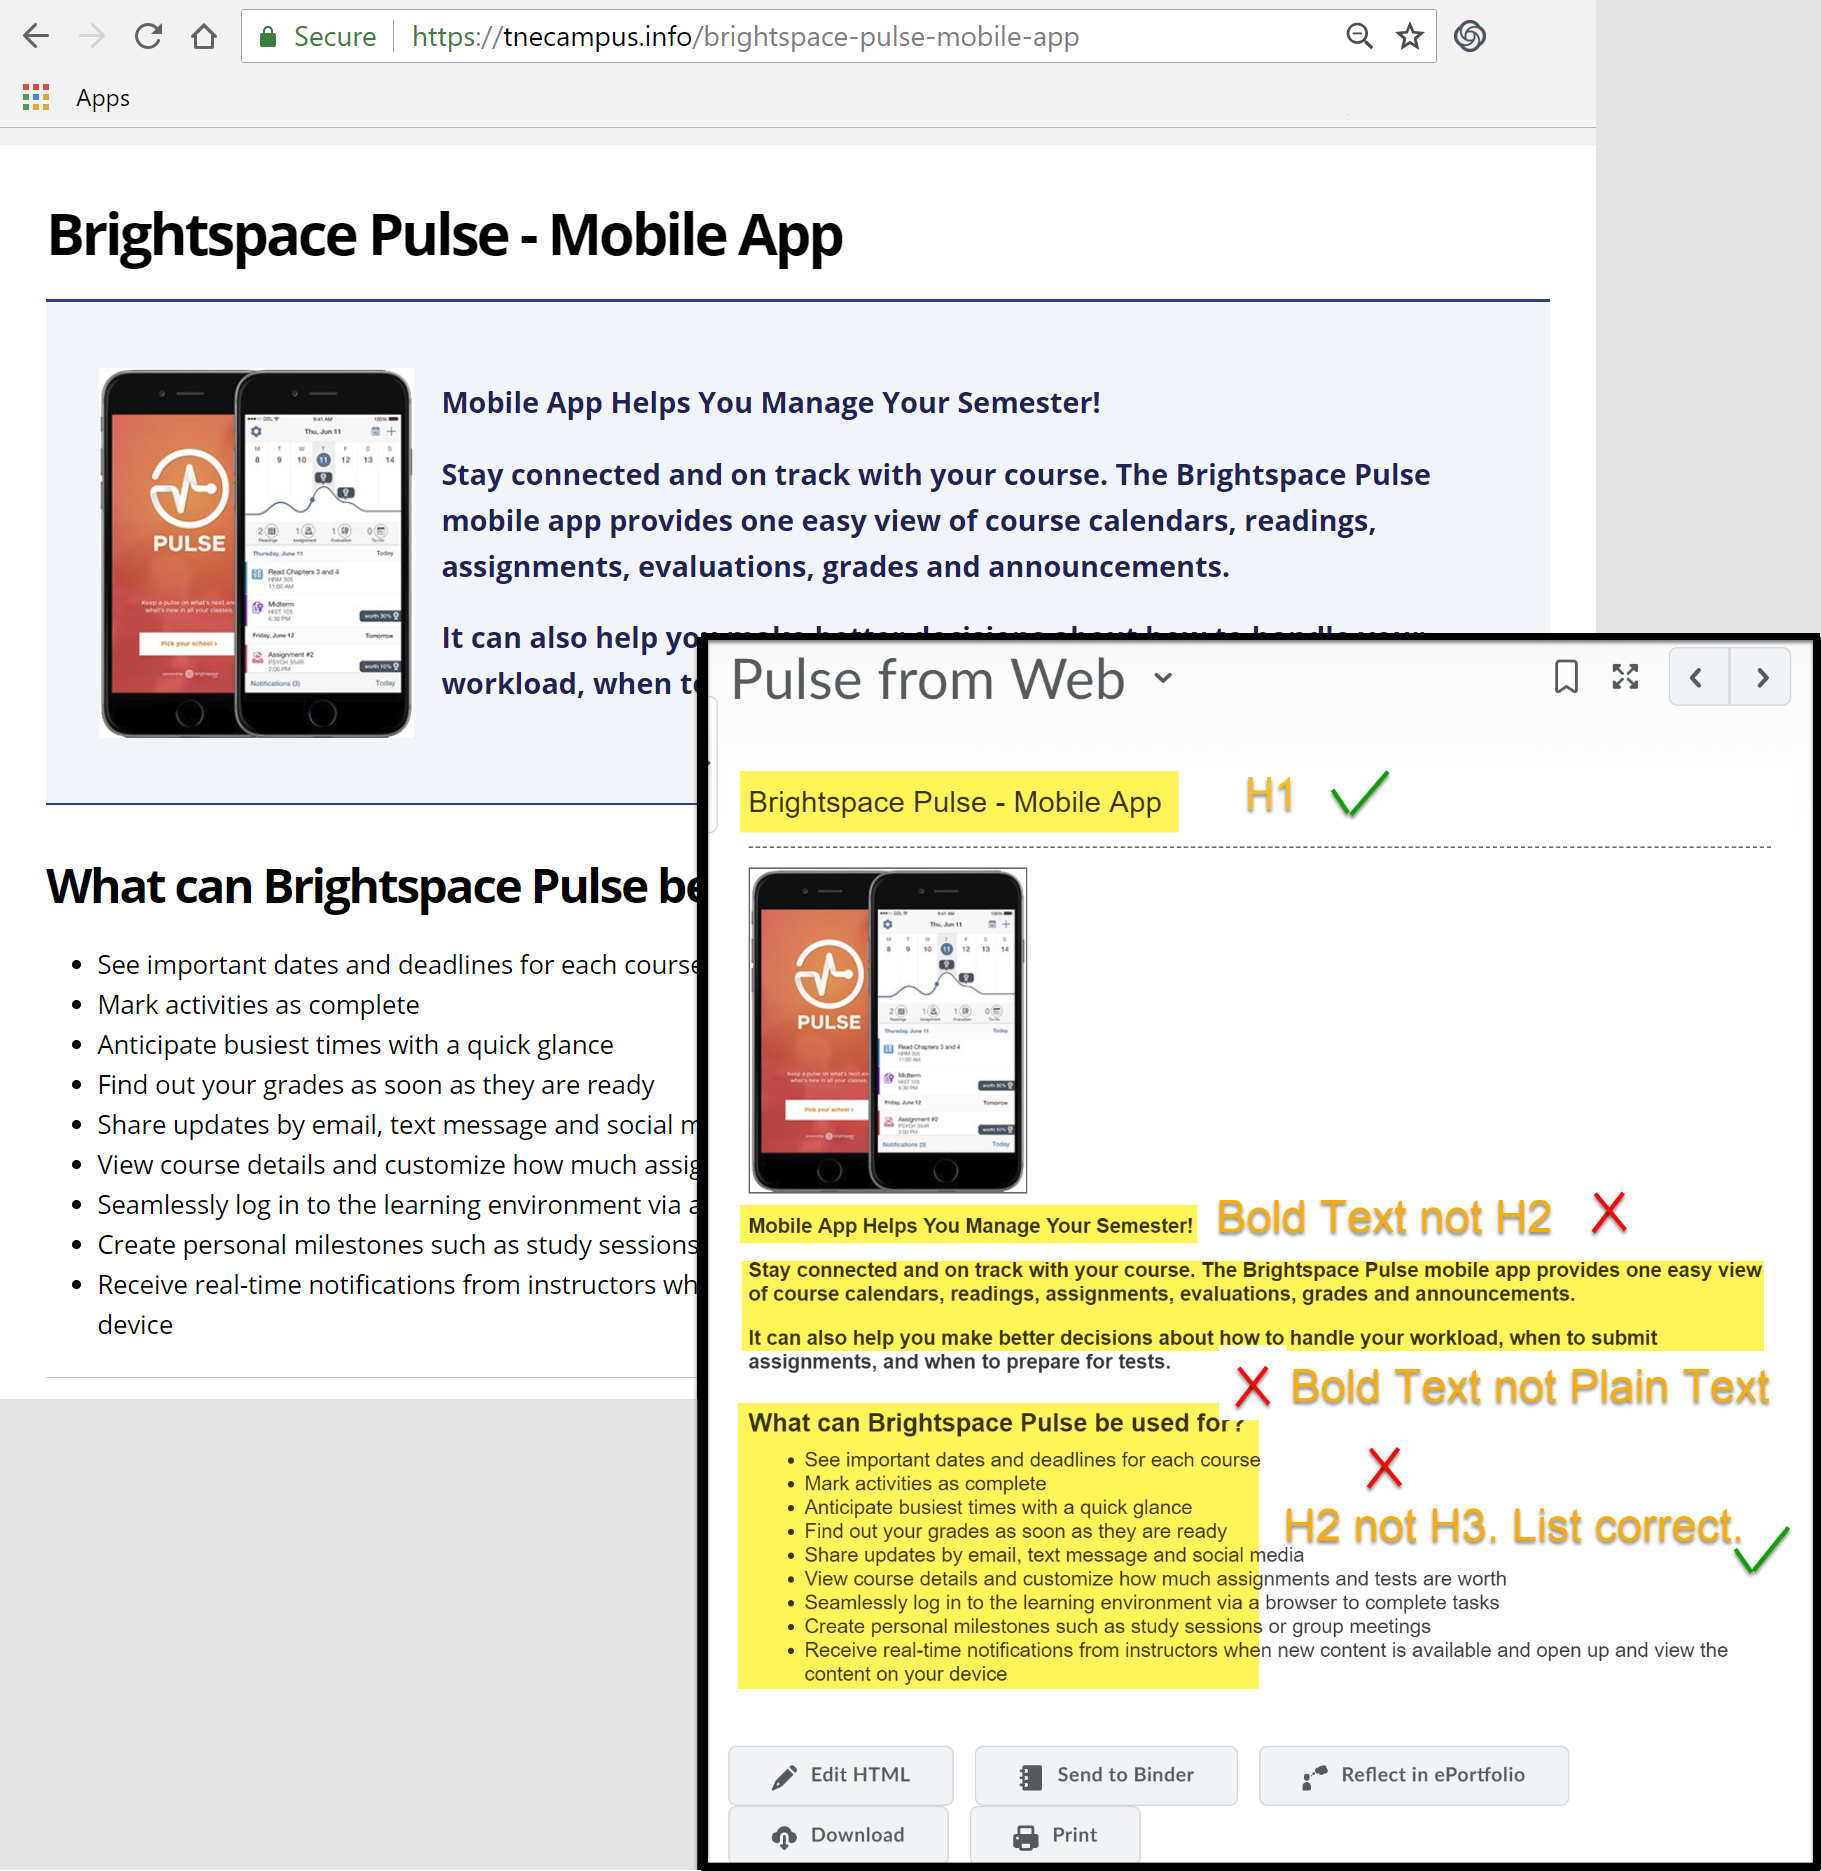 Pulse web page copied to HTML in Brightspace. H1 transfered, but bold text transferred as headings.